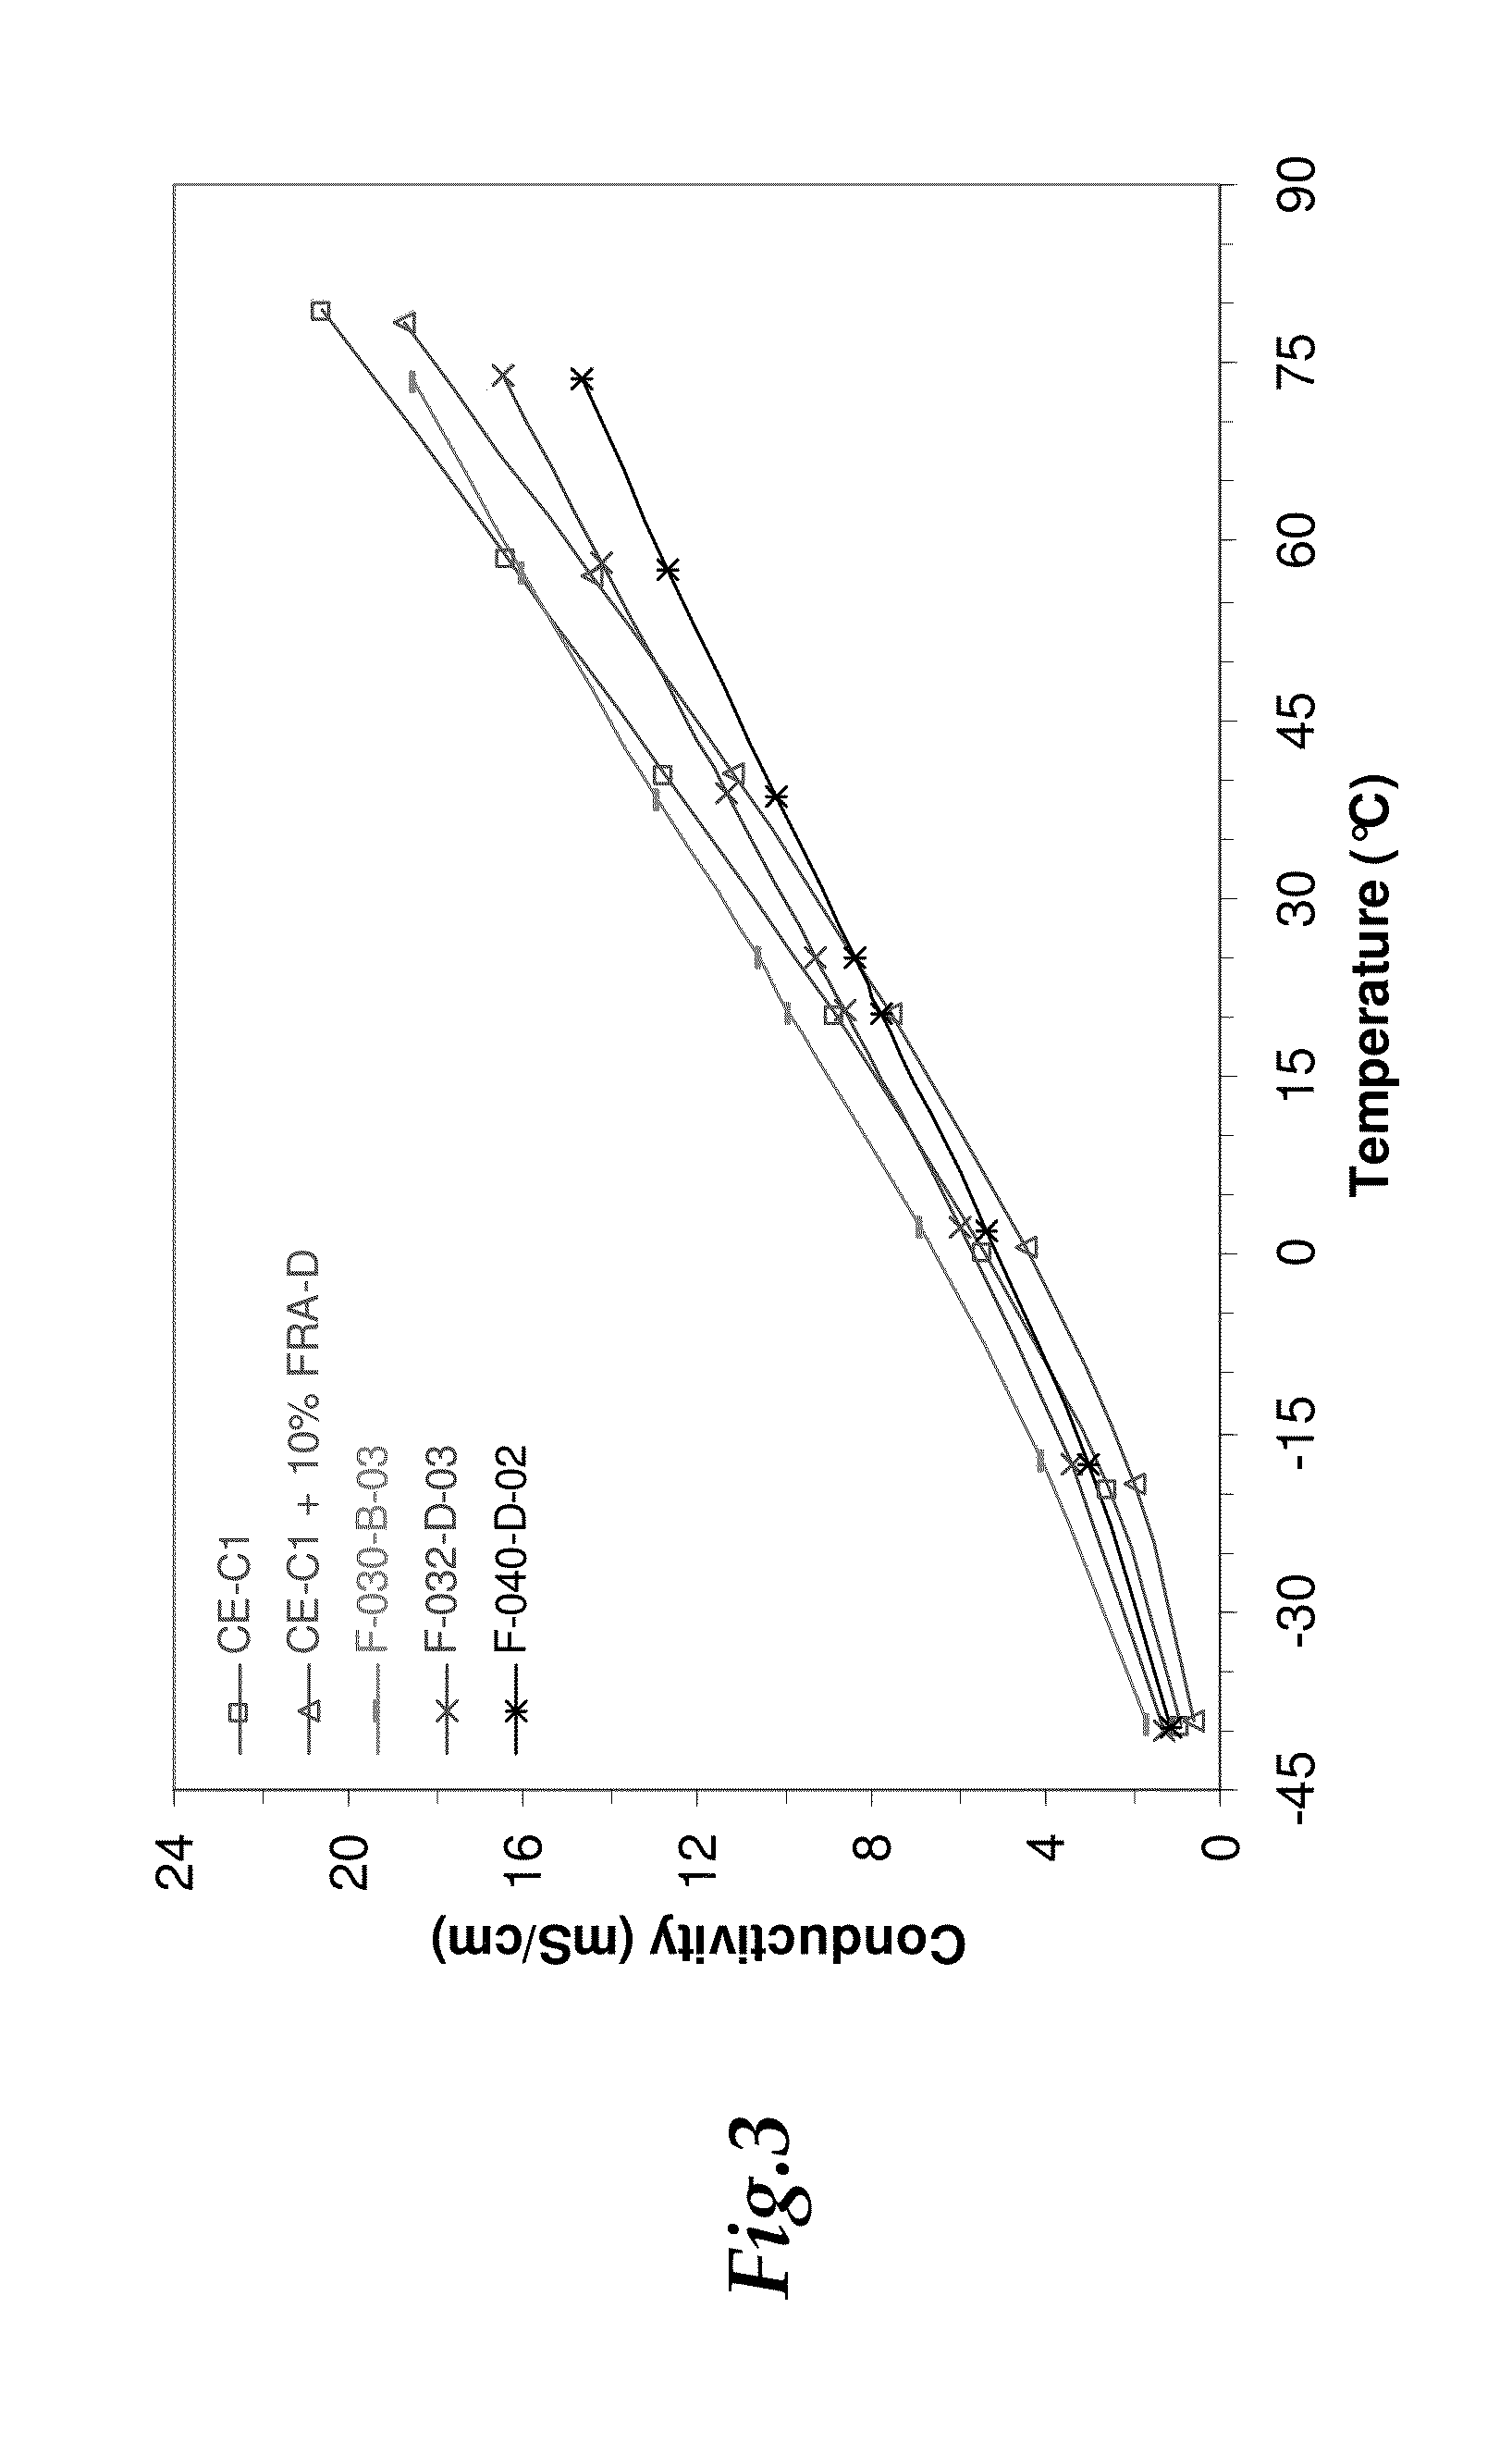 Electrolyte for Electrochemical Energy Storage Devices